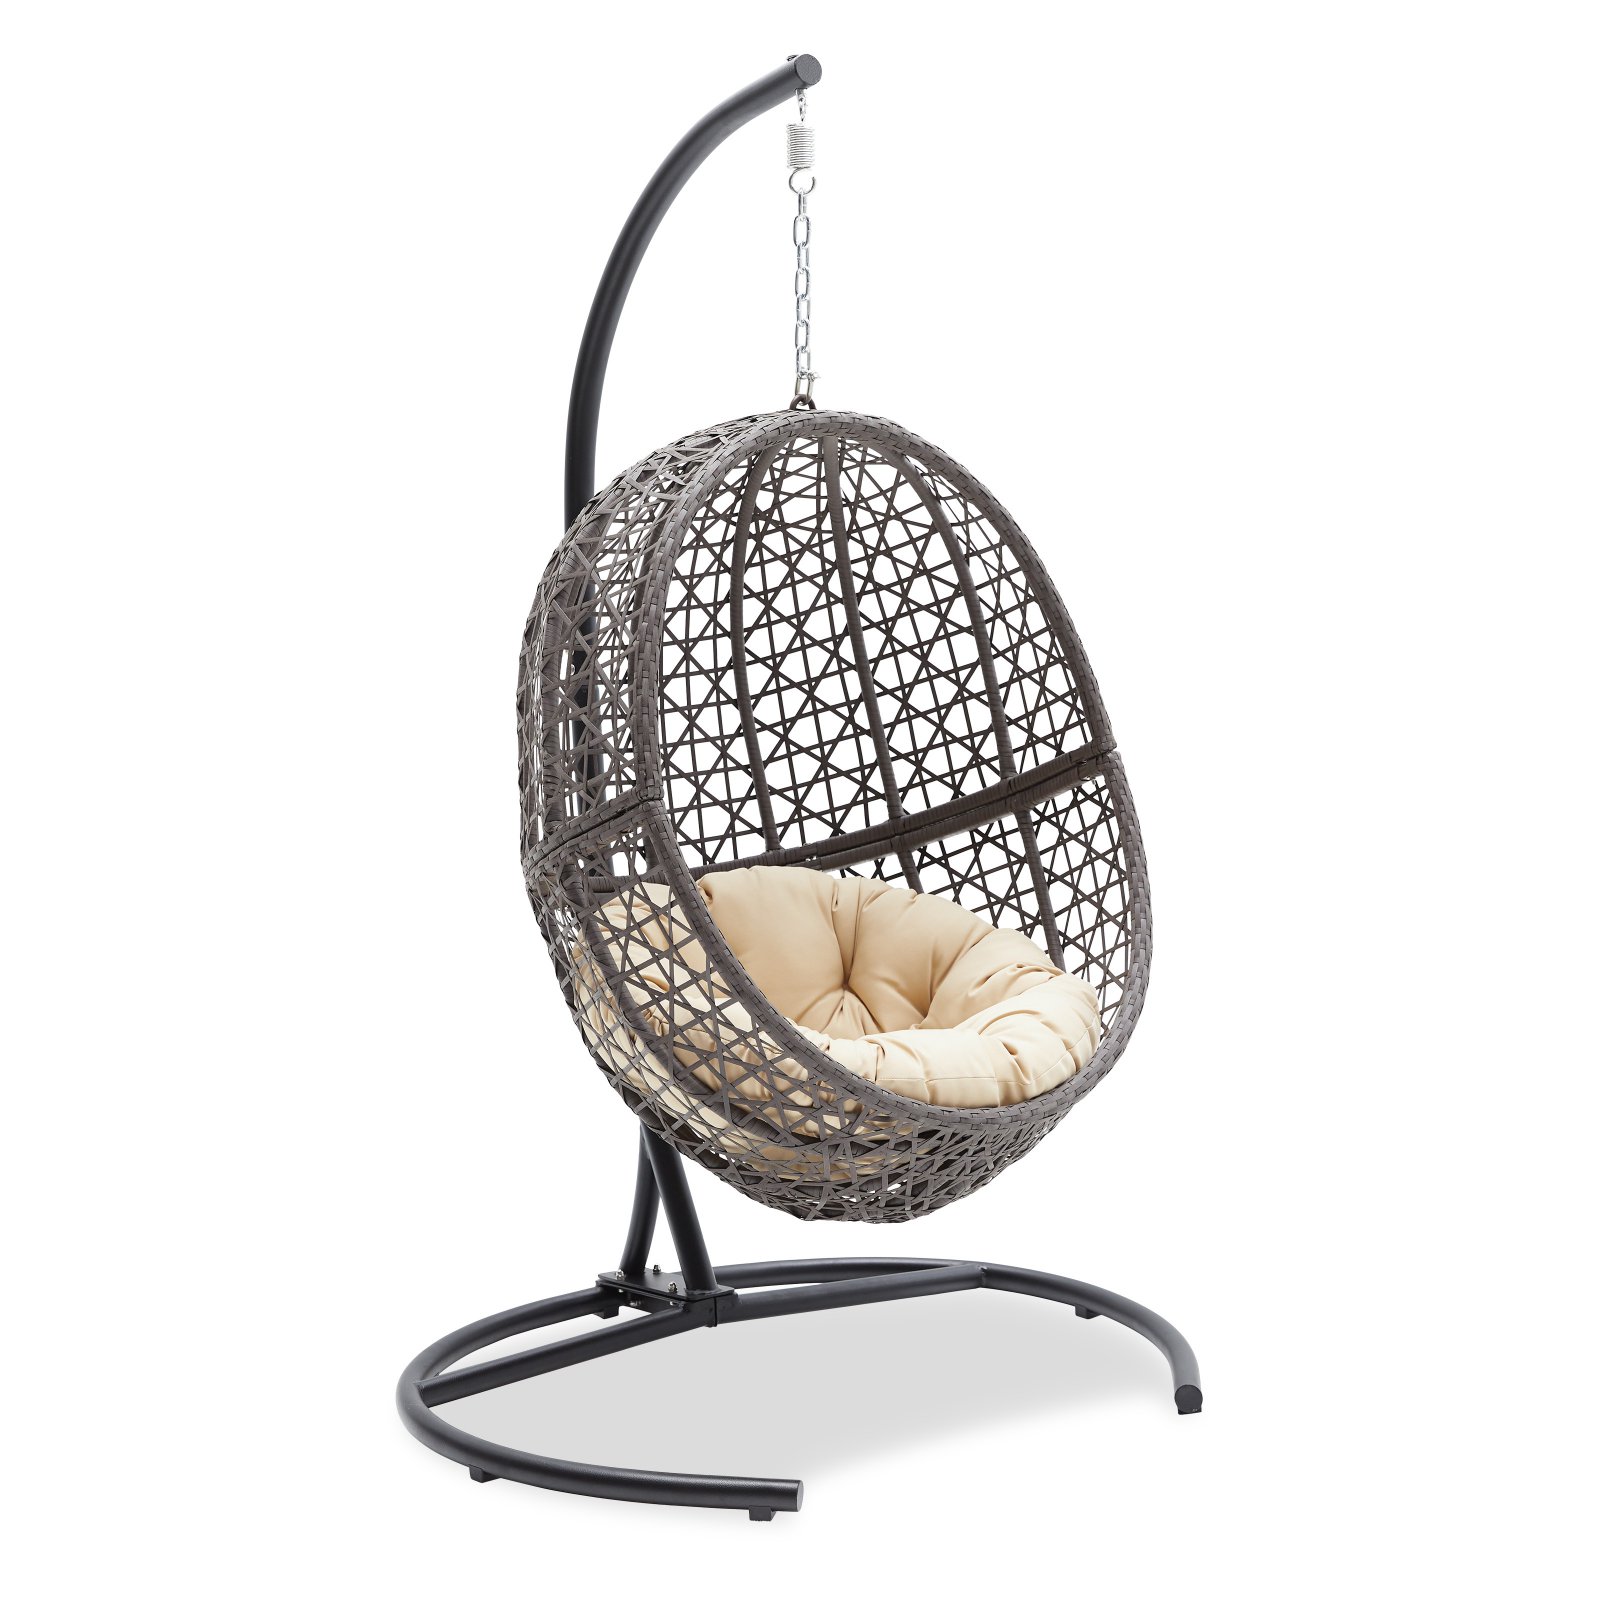 Belham Living Resin Wicker Hanging Egg Chair with Cushion and Stand - image 2 of 11